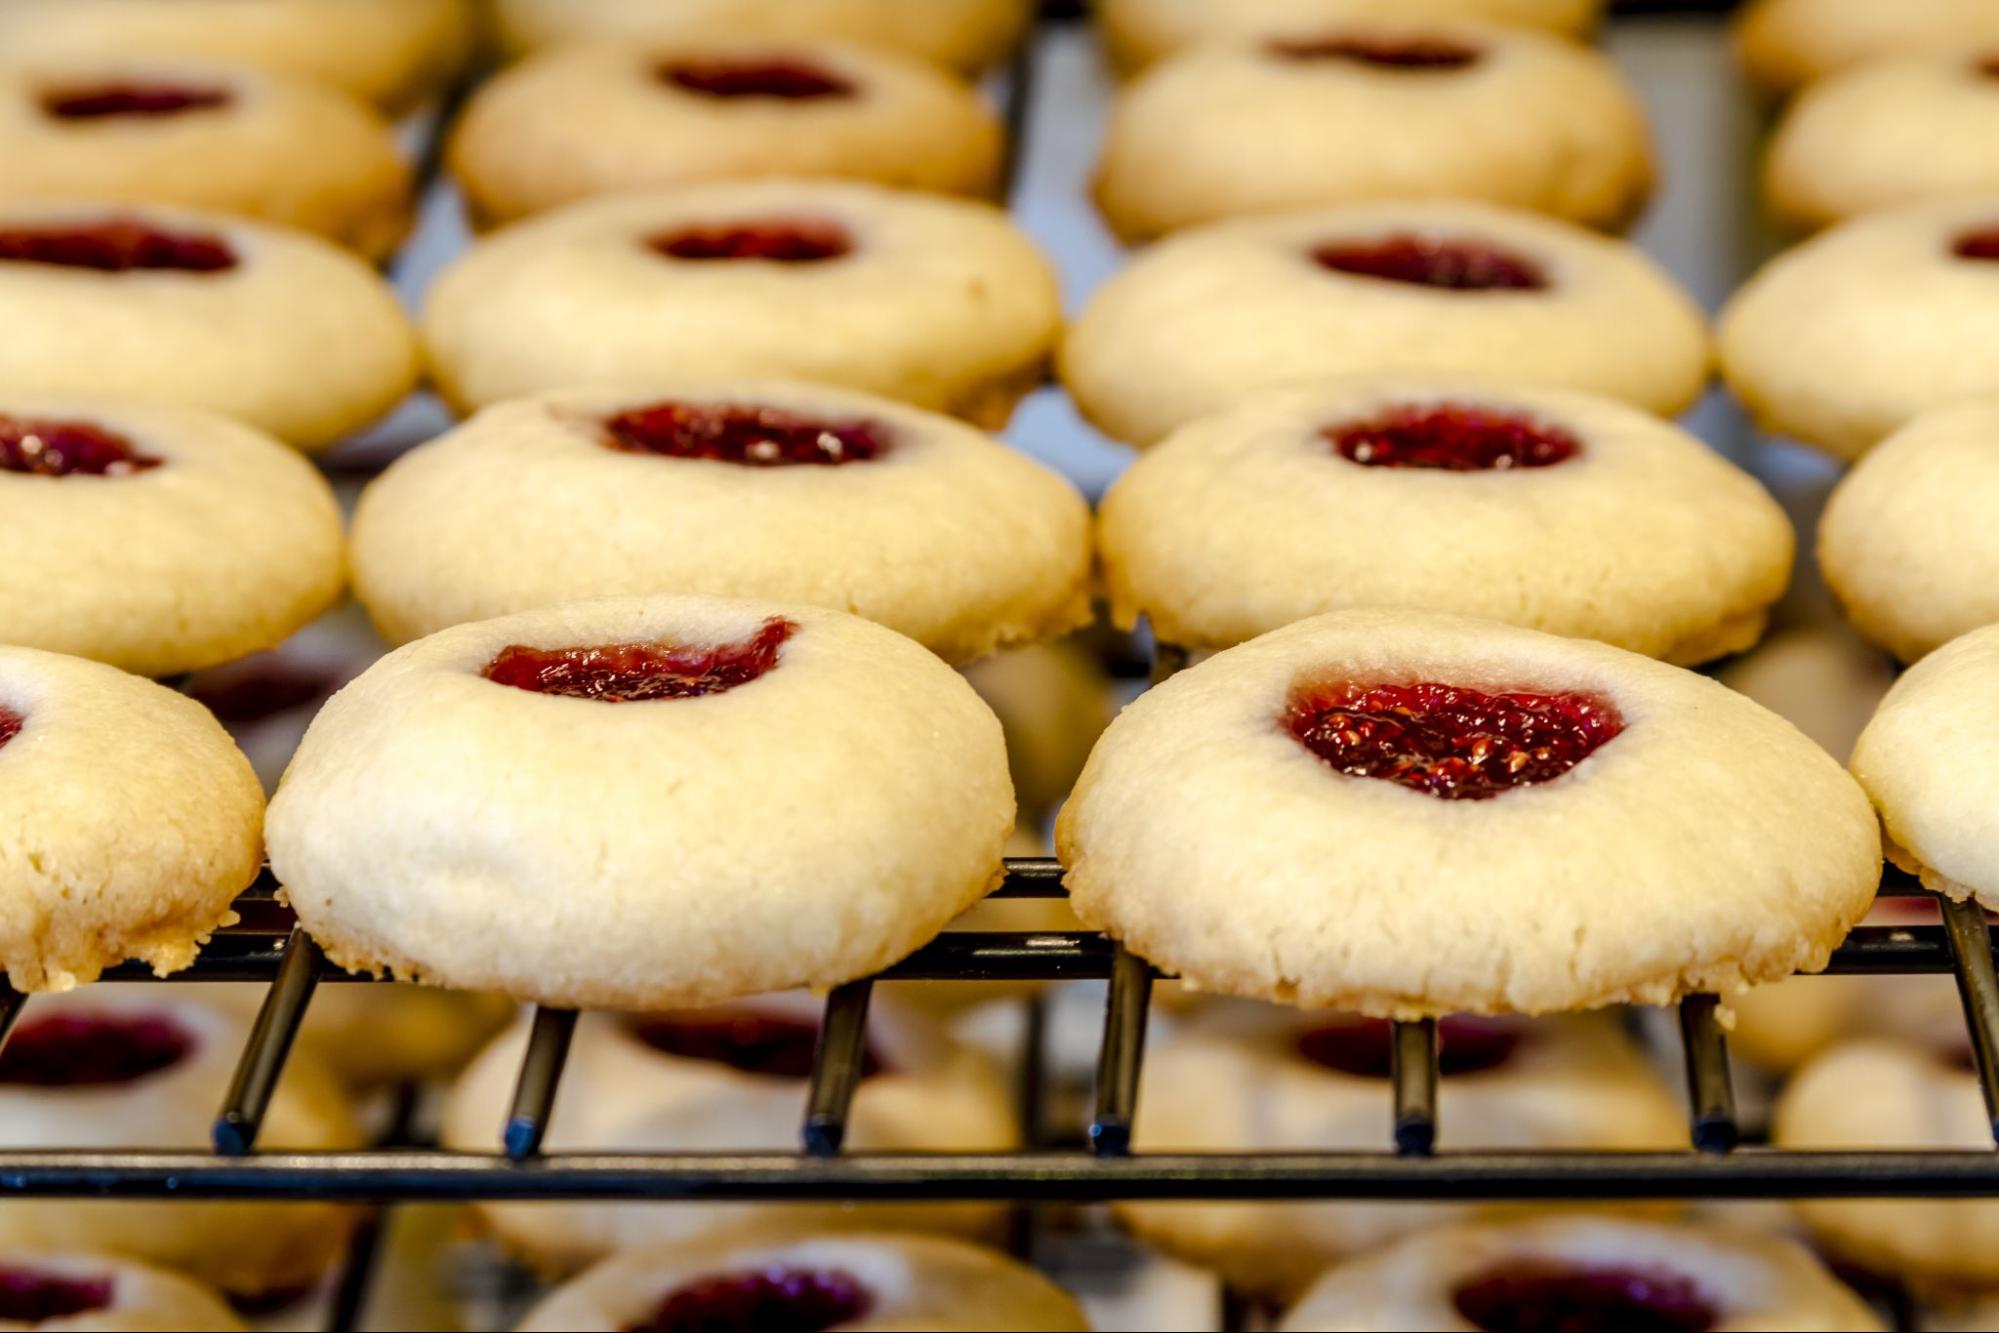 Raspberry thumbprint cookies cooling on a tray